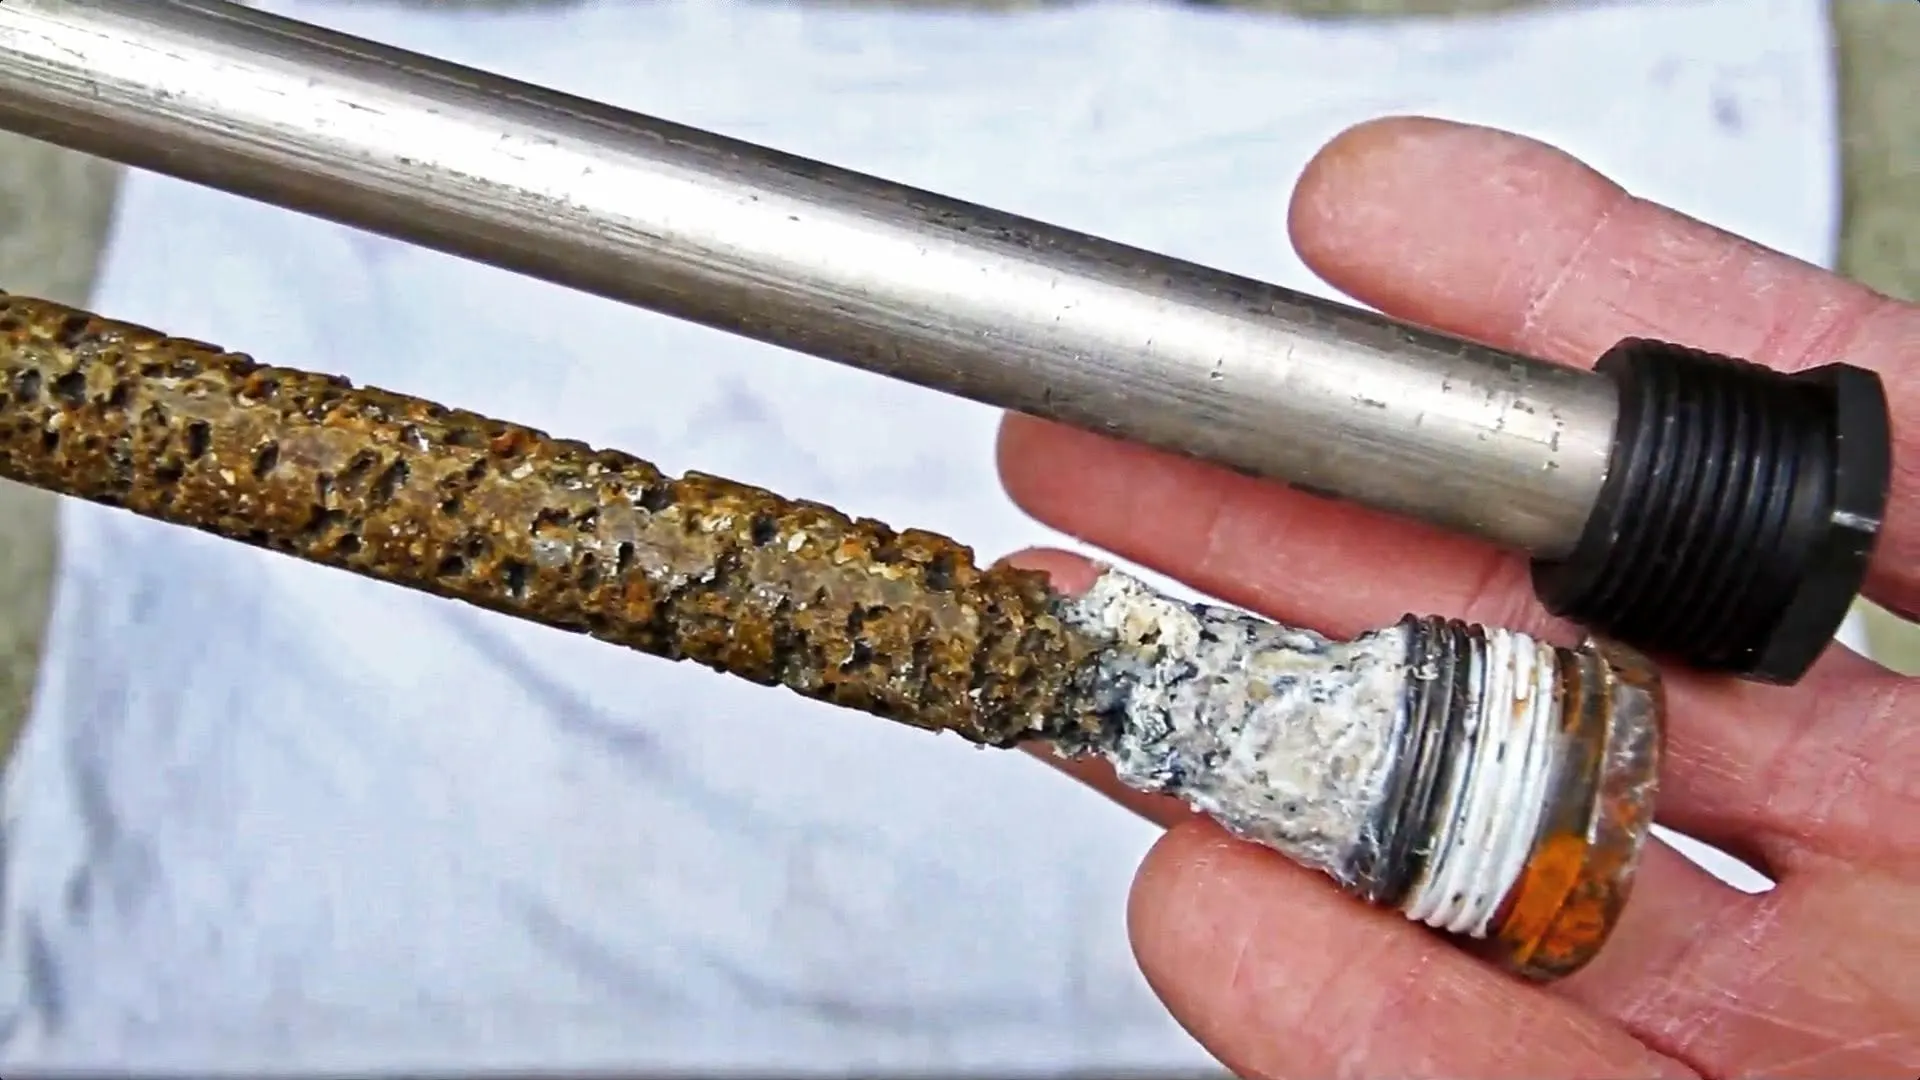 When RV water heater troubleshooting, check the anode rod